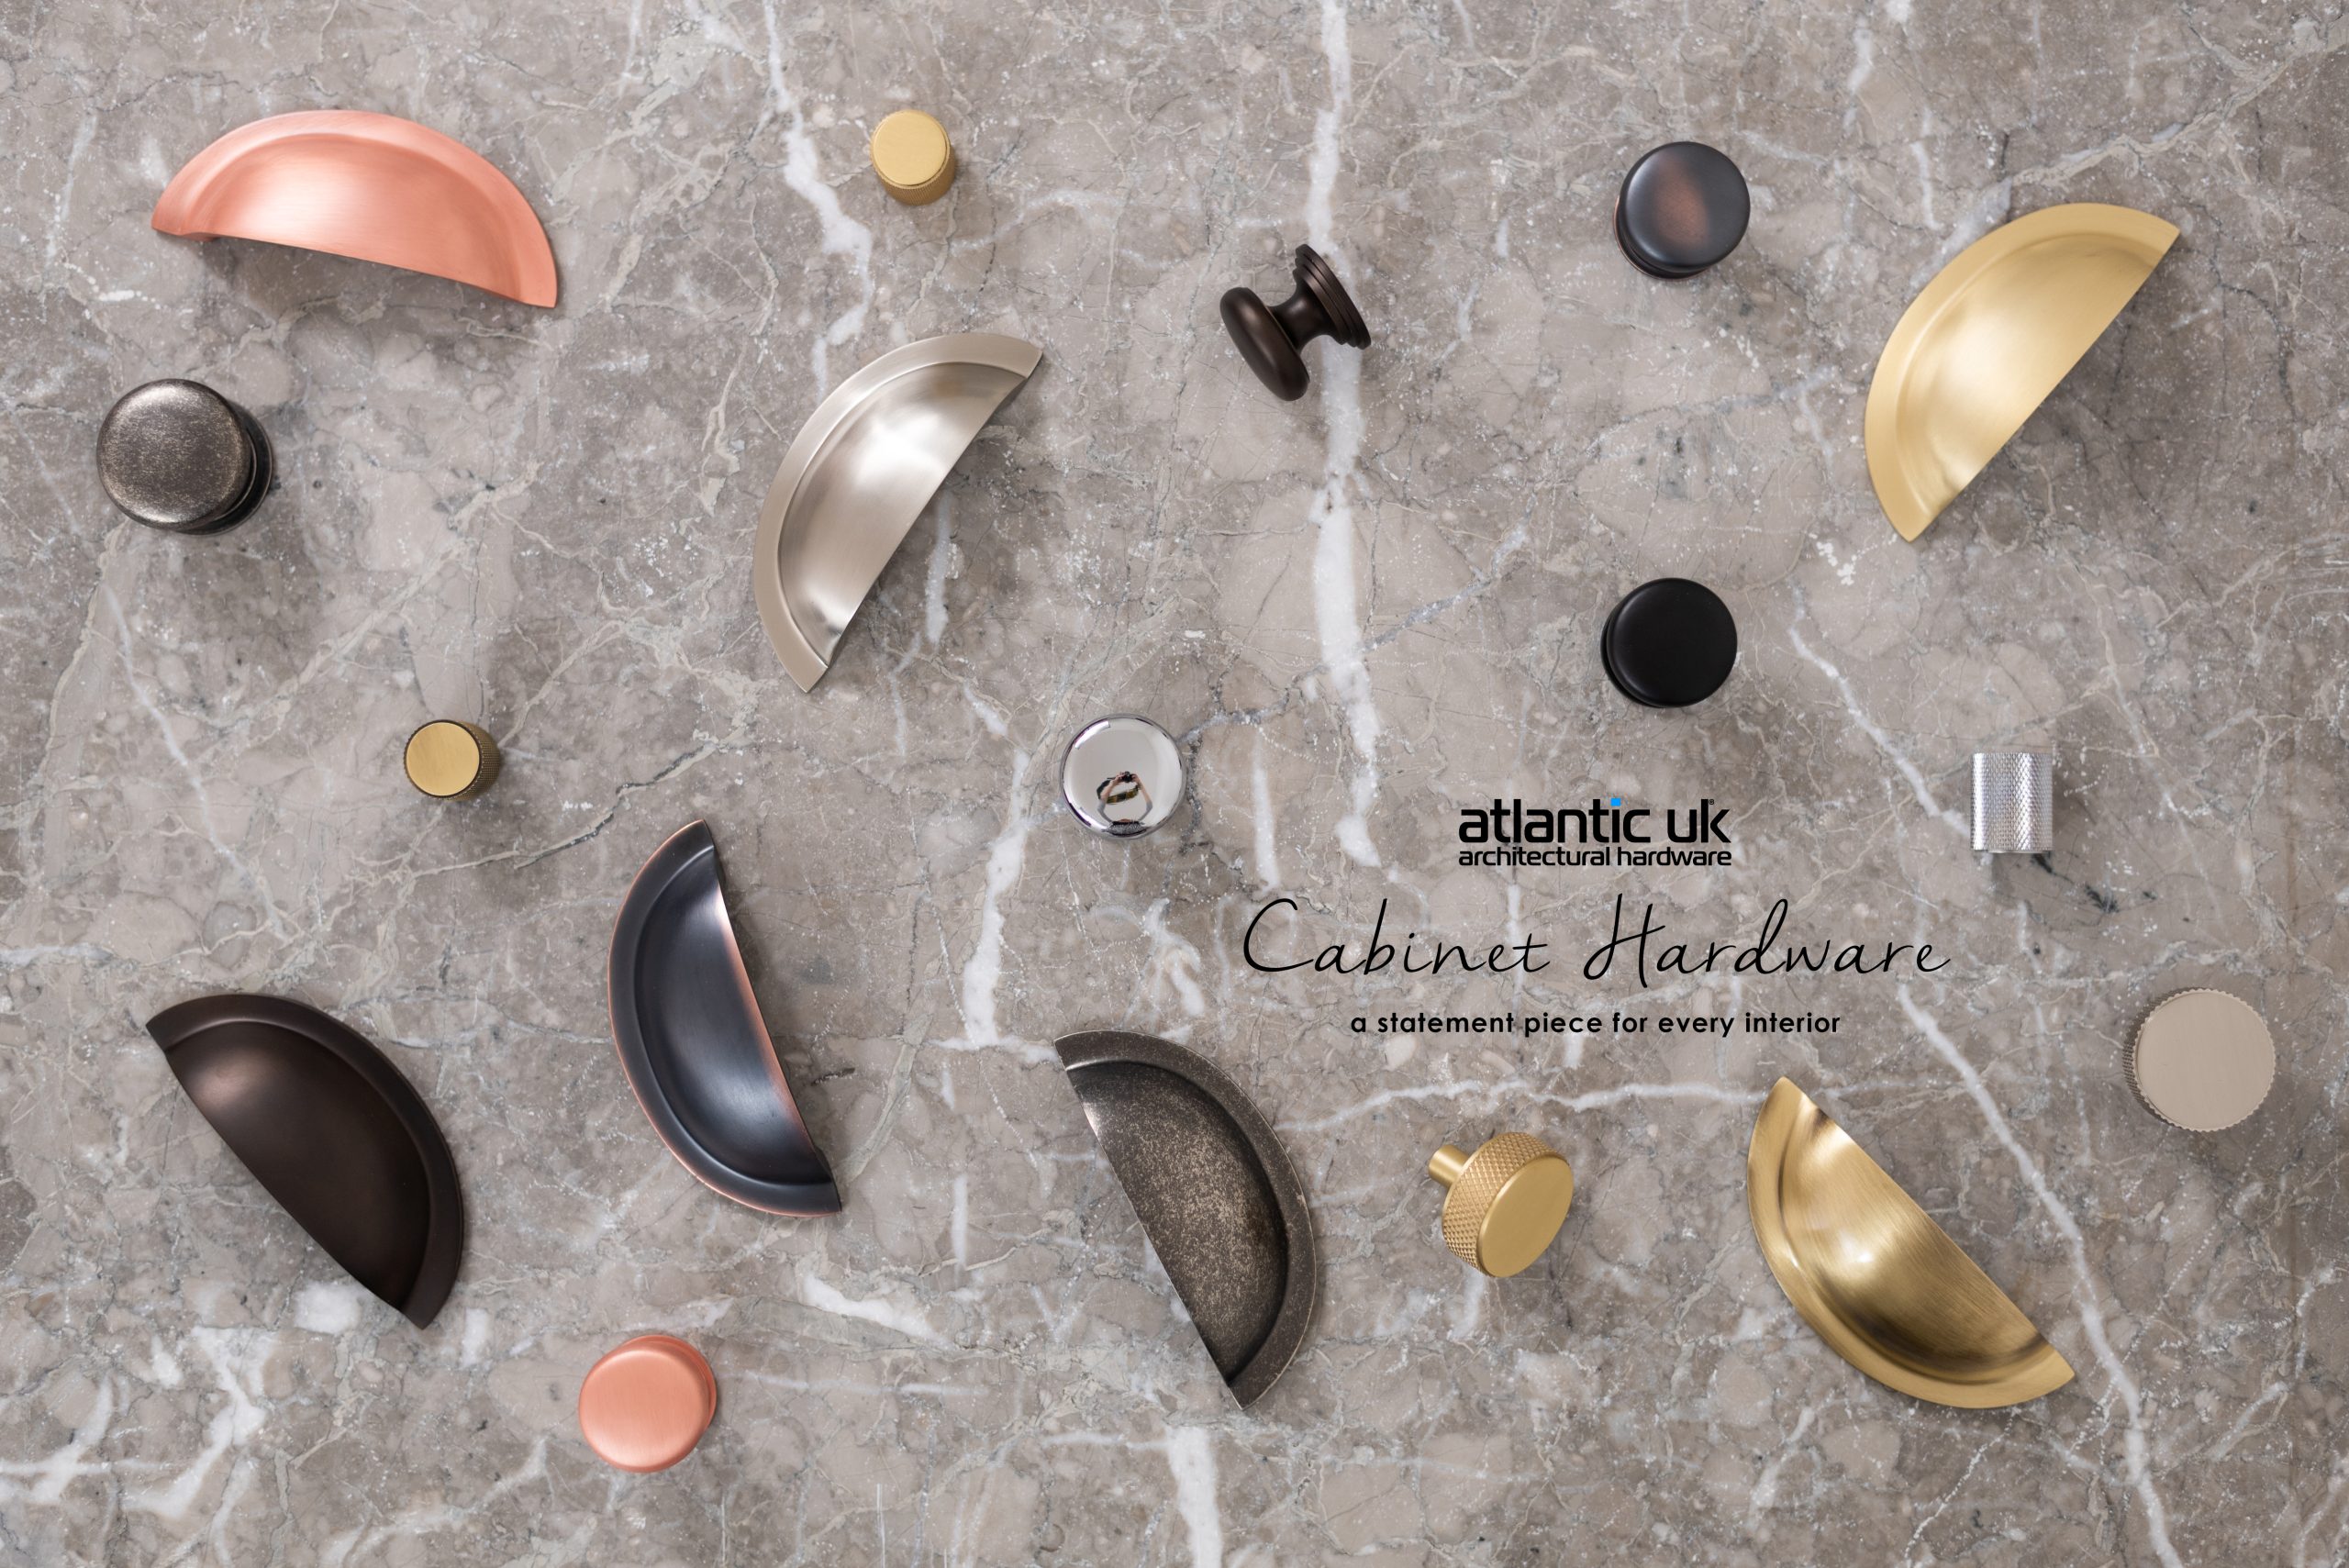 The Atlantic Cabinet Hardware Collection!